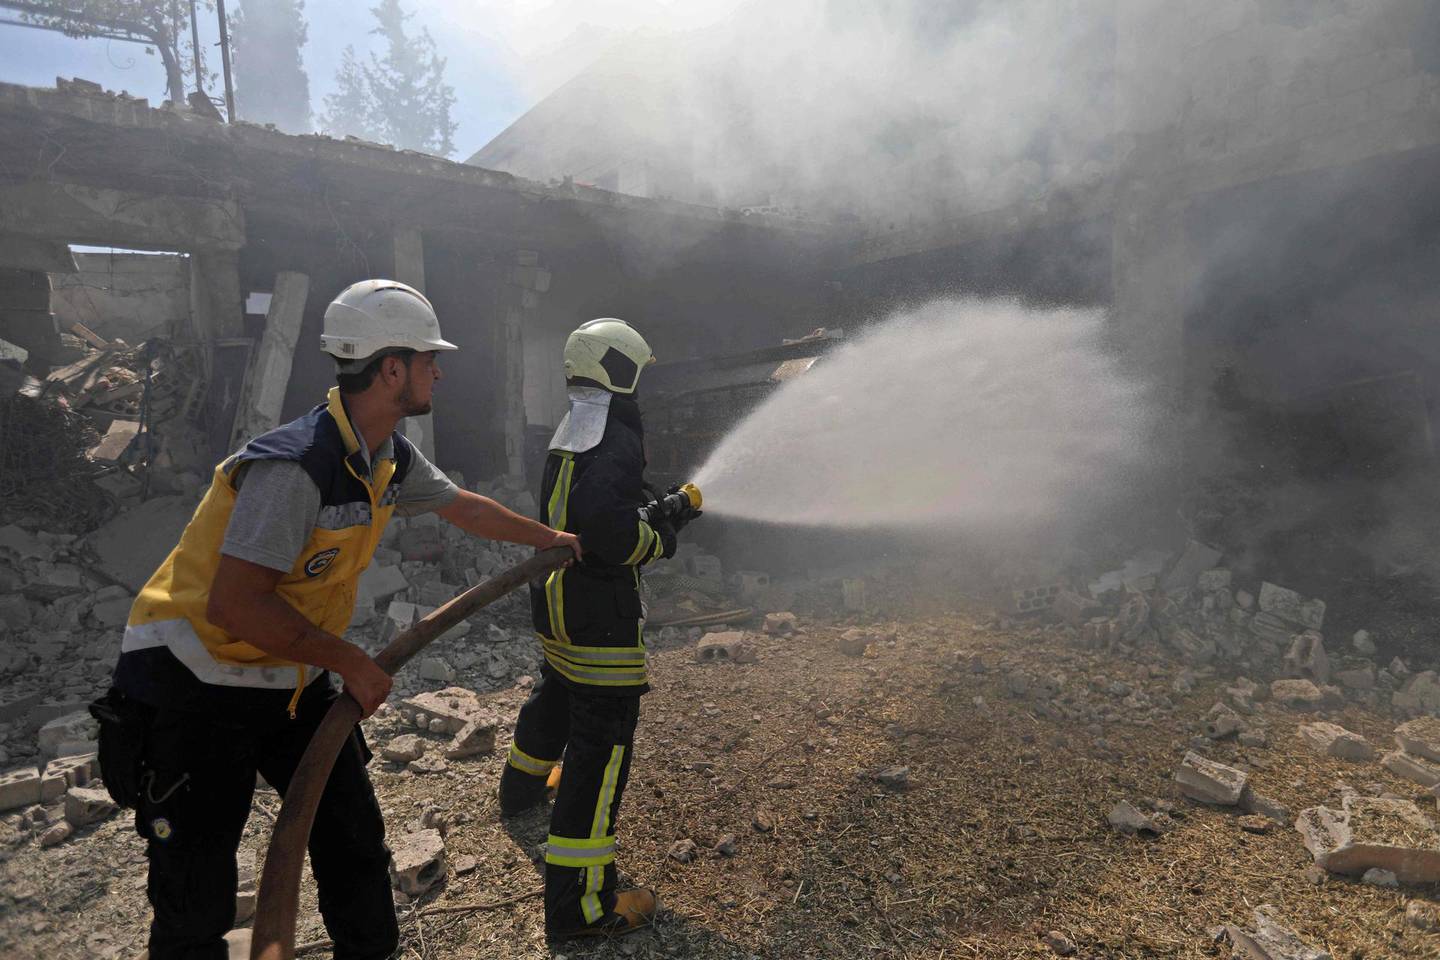 Syrian firefighters try put out a fire in a building that was hit by reported Russian air strikes in the rebel-hold town of Jadraya, about 35 kilometres southwest of the city of Idlib, on September 4, 2018. - Russian warplanes battered Syria's rebel-controlled northwestern Idlib province on September 4 for the first time in three weeks, the Syrian Observatory for Human Rights reported, as fears of a government offensive mount. (Photo by OMAR HAJ KADOUR / AFP)